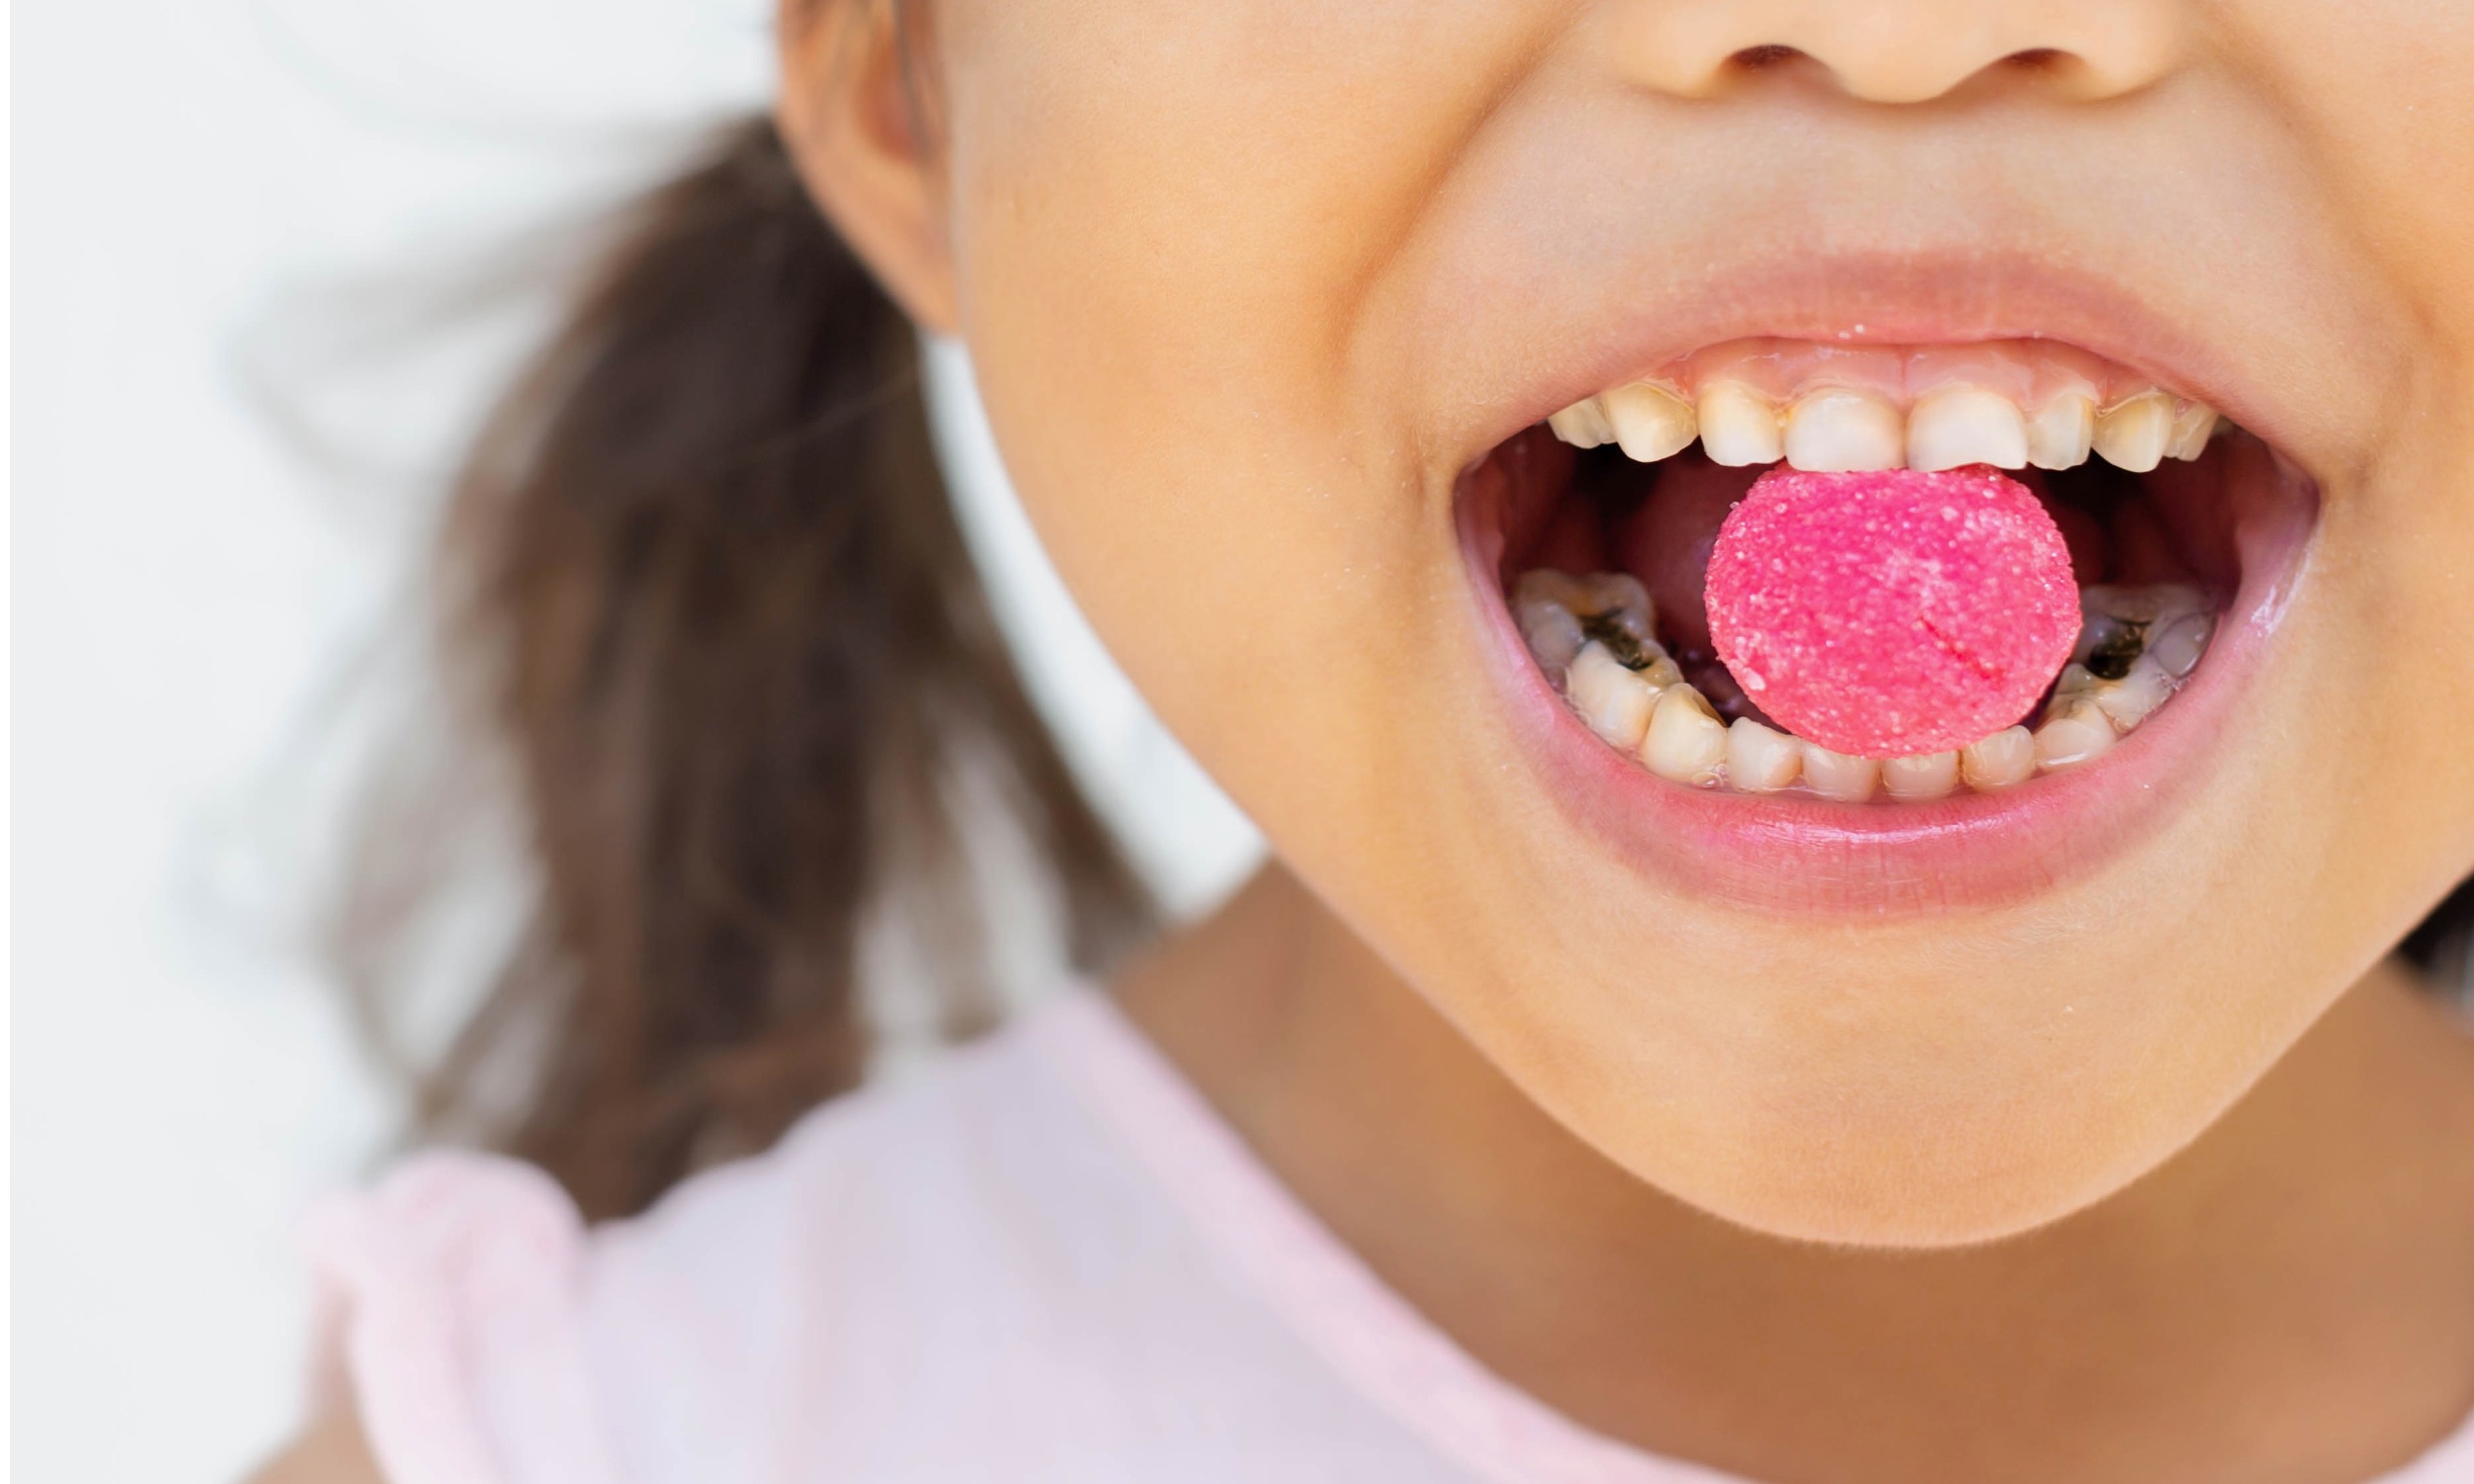 How Candy Can Harm Your Teeth And Overall Health